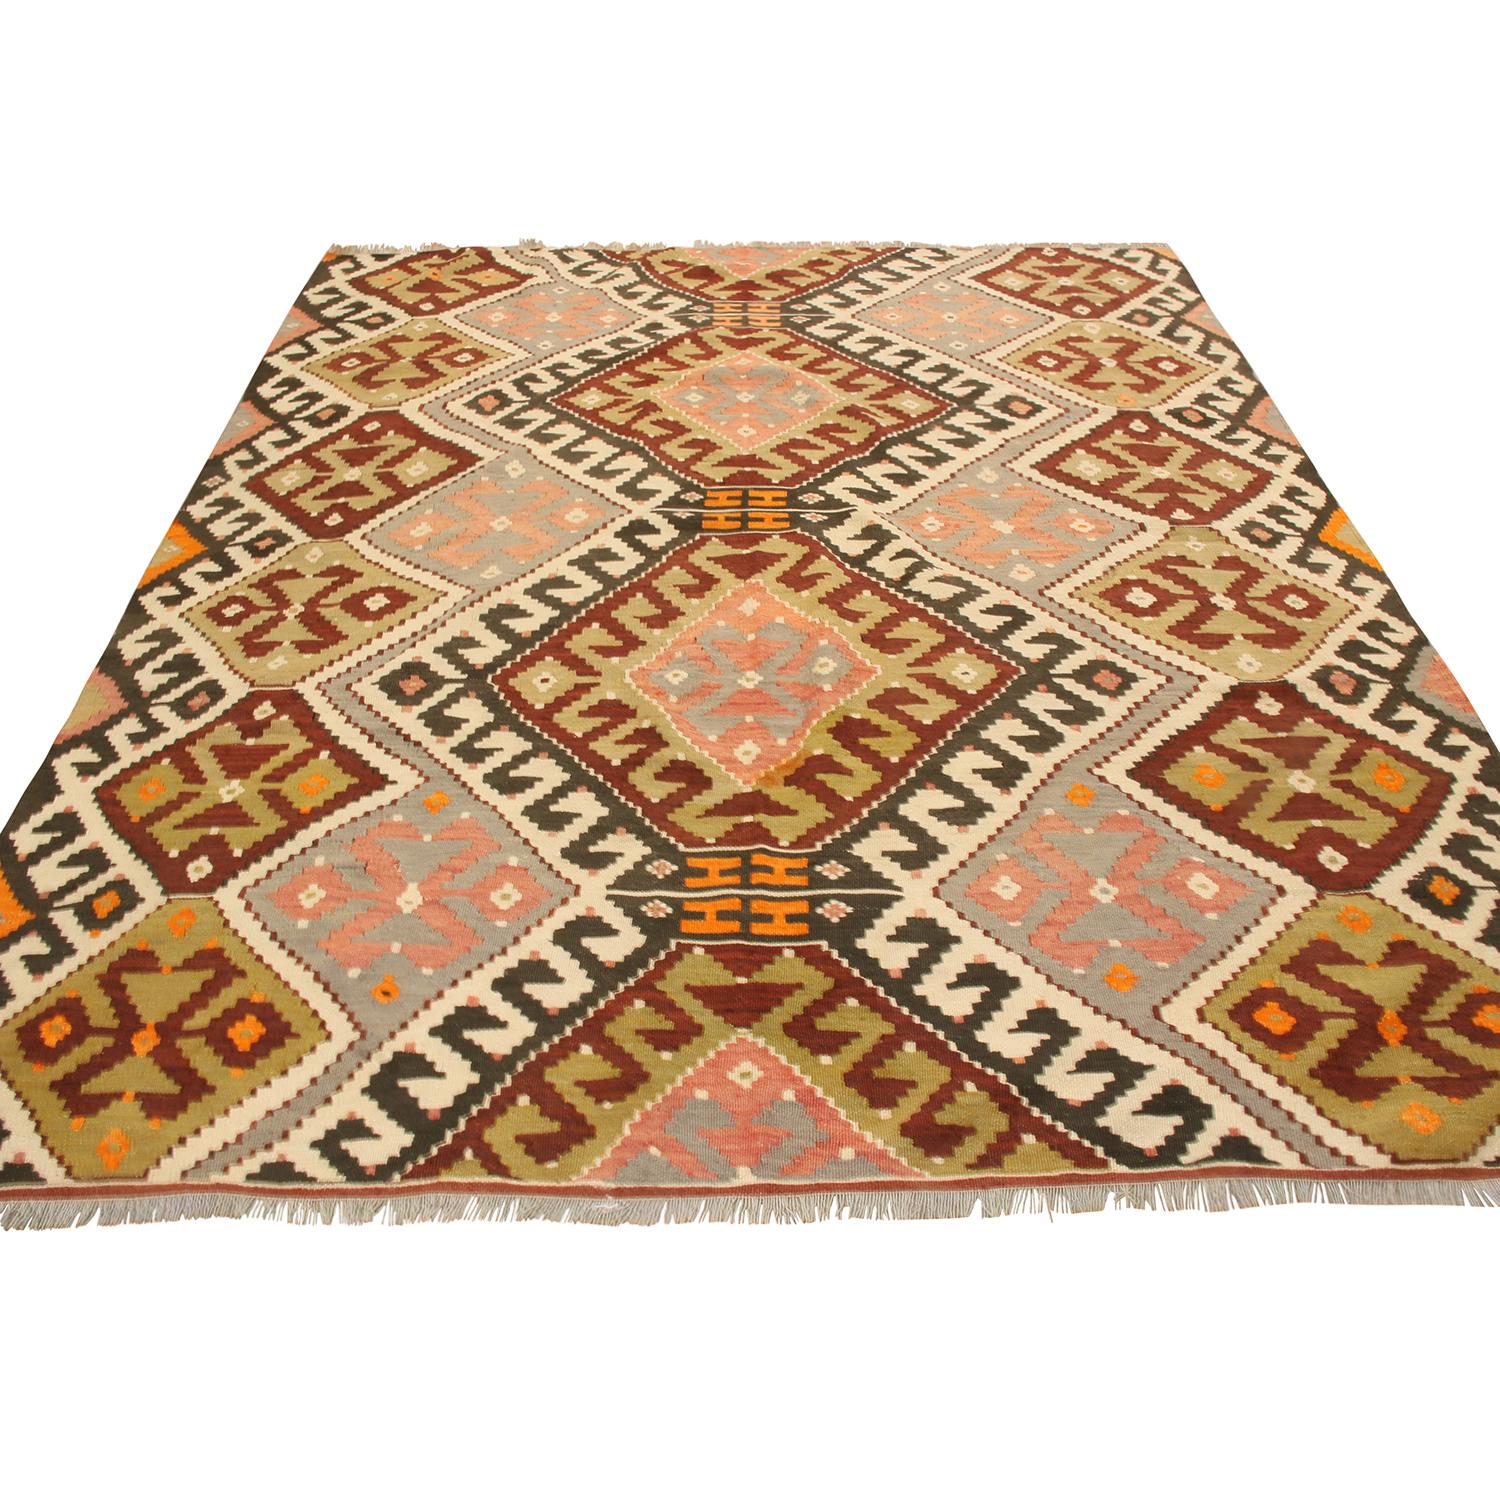 Flat-woven in high-quality wool originating from Turkey between 1930-1940, this vintage Sivas wool Kilim rug enjoys a distinguished tribal influence with a unique, appealing size among its family of Turkish Kilim, complemented by a visually balanced